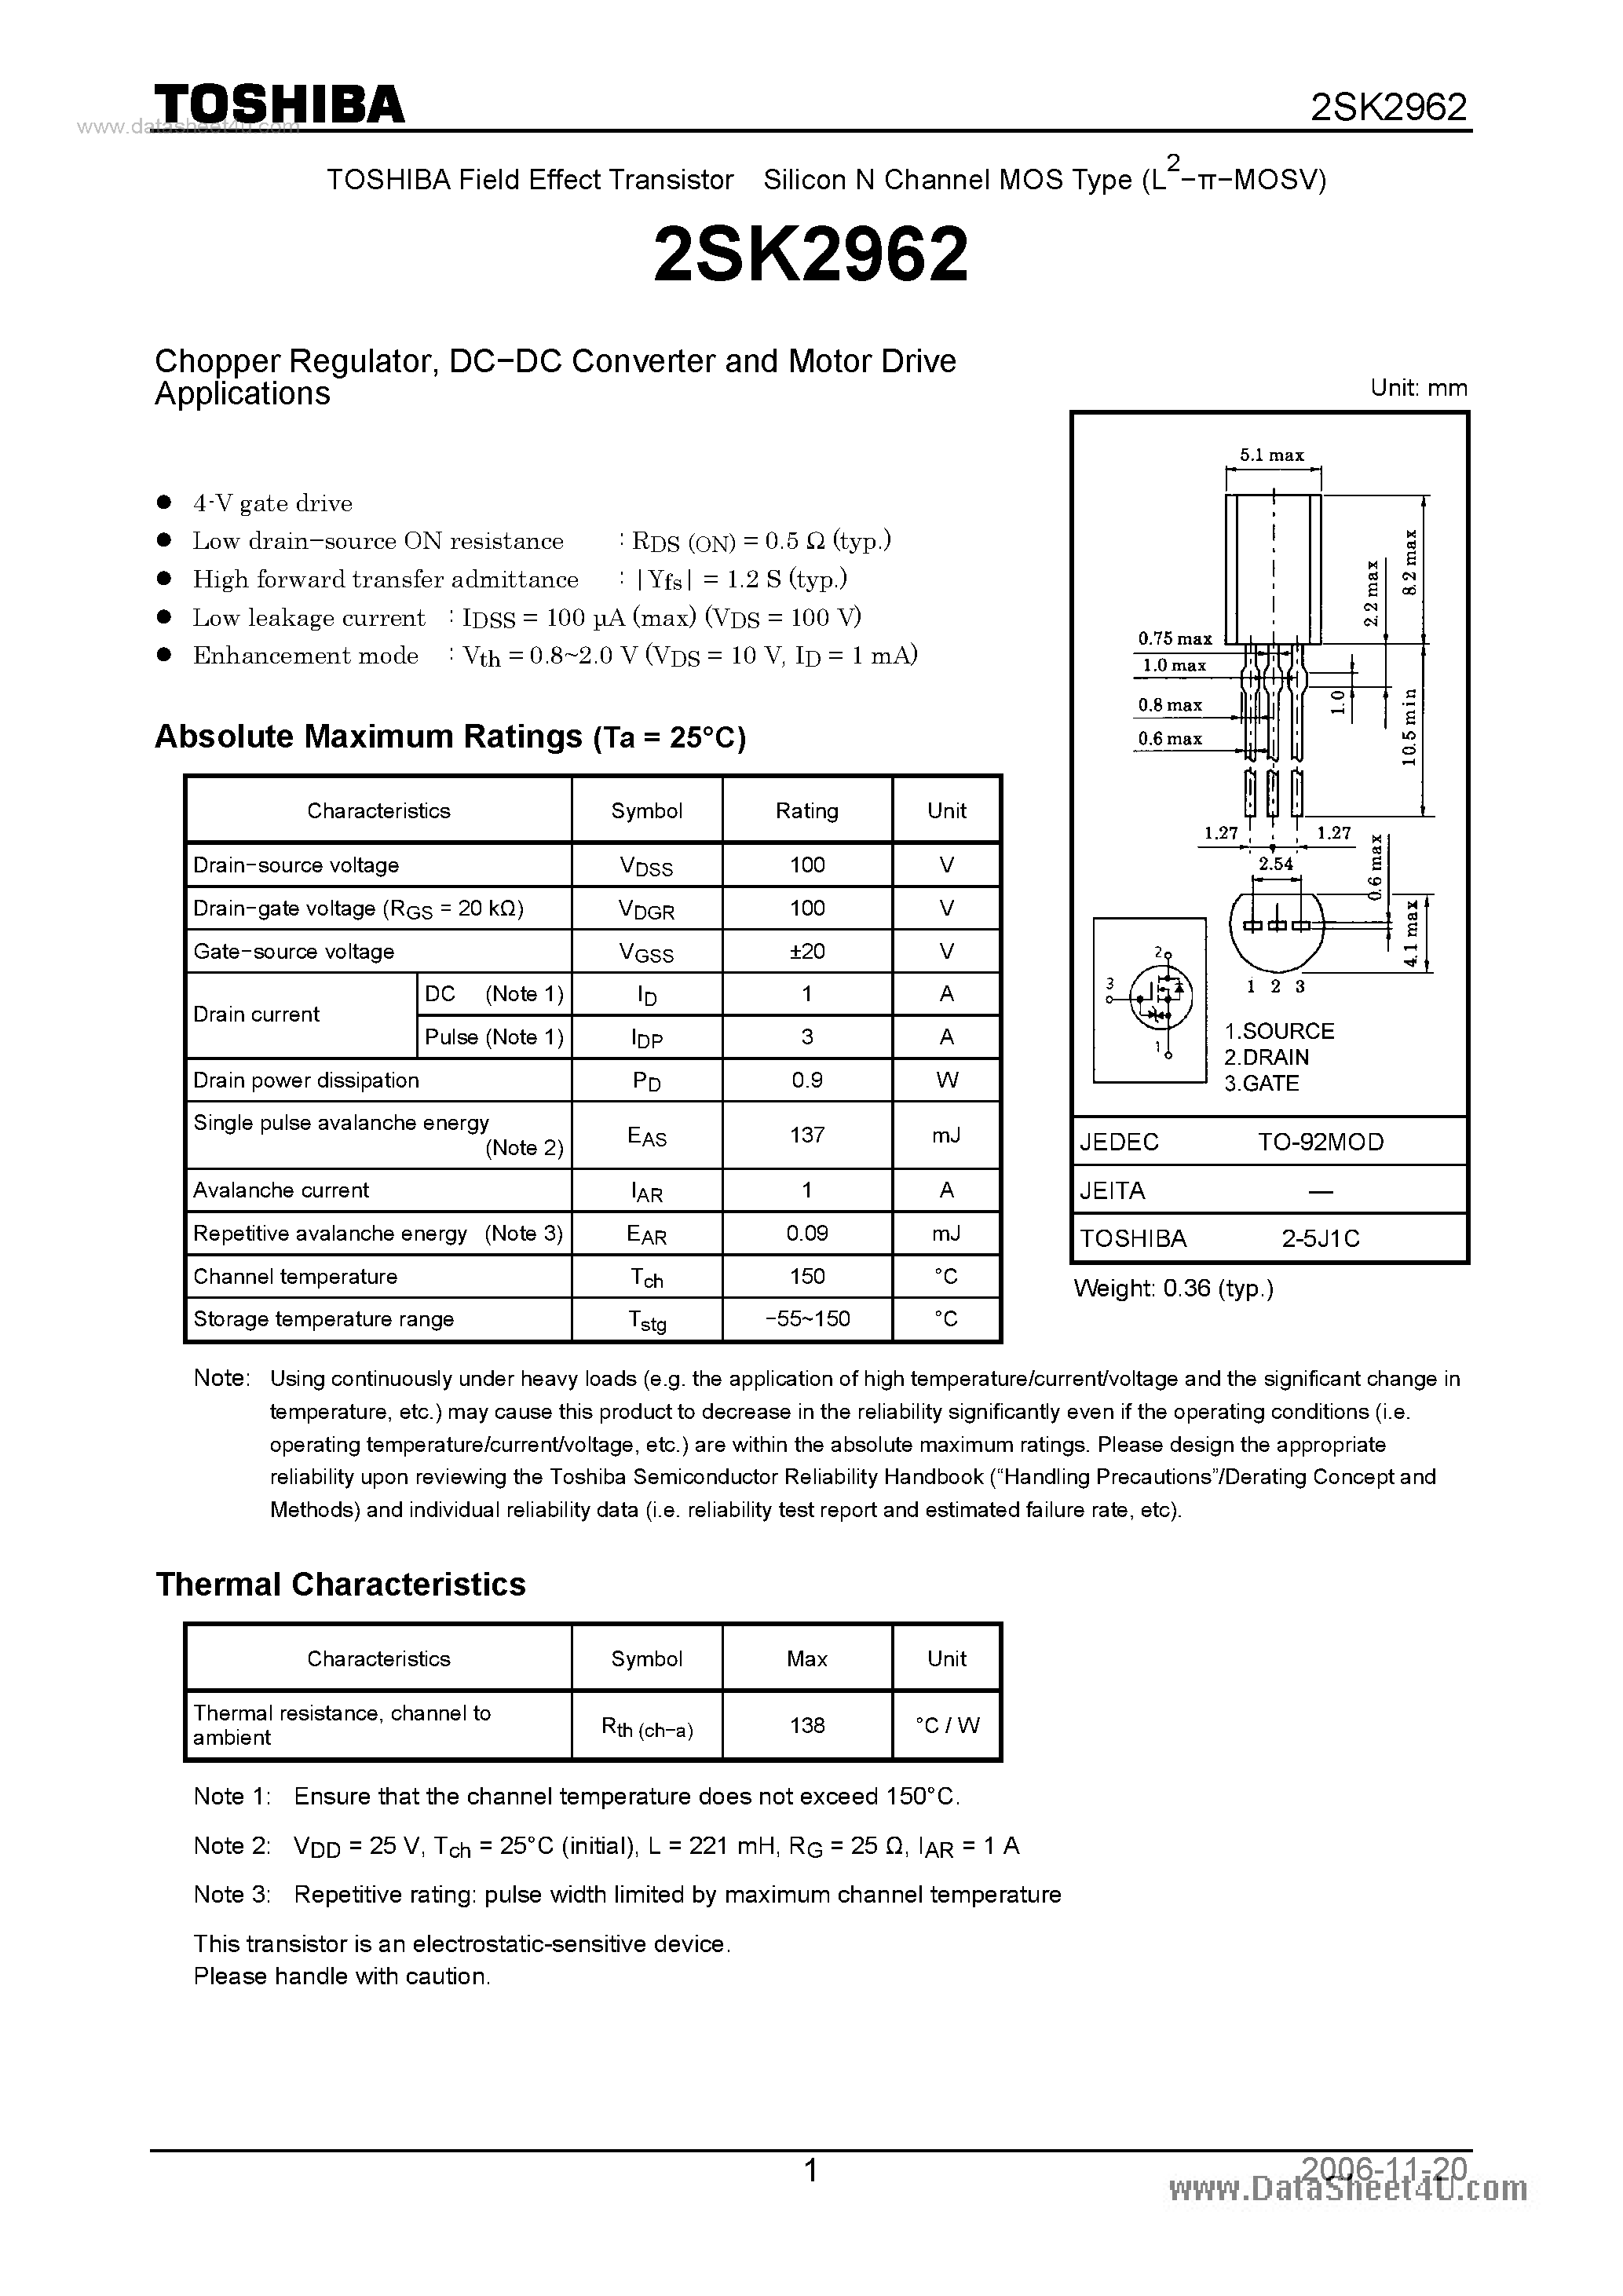 Datasheet K2962 - Search -----> 2SK2962 page 1